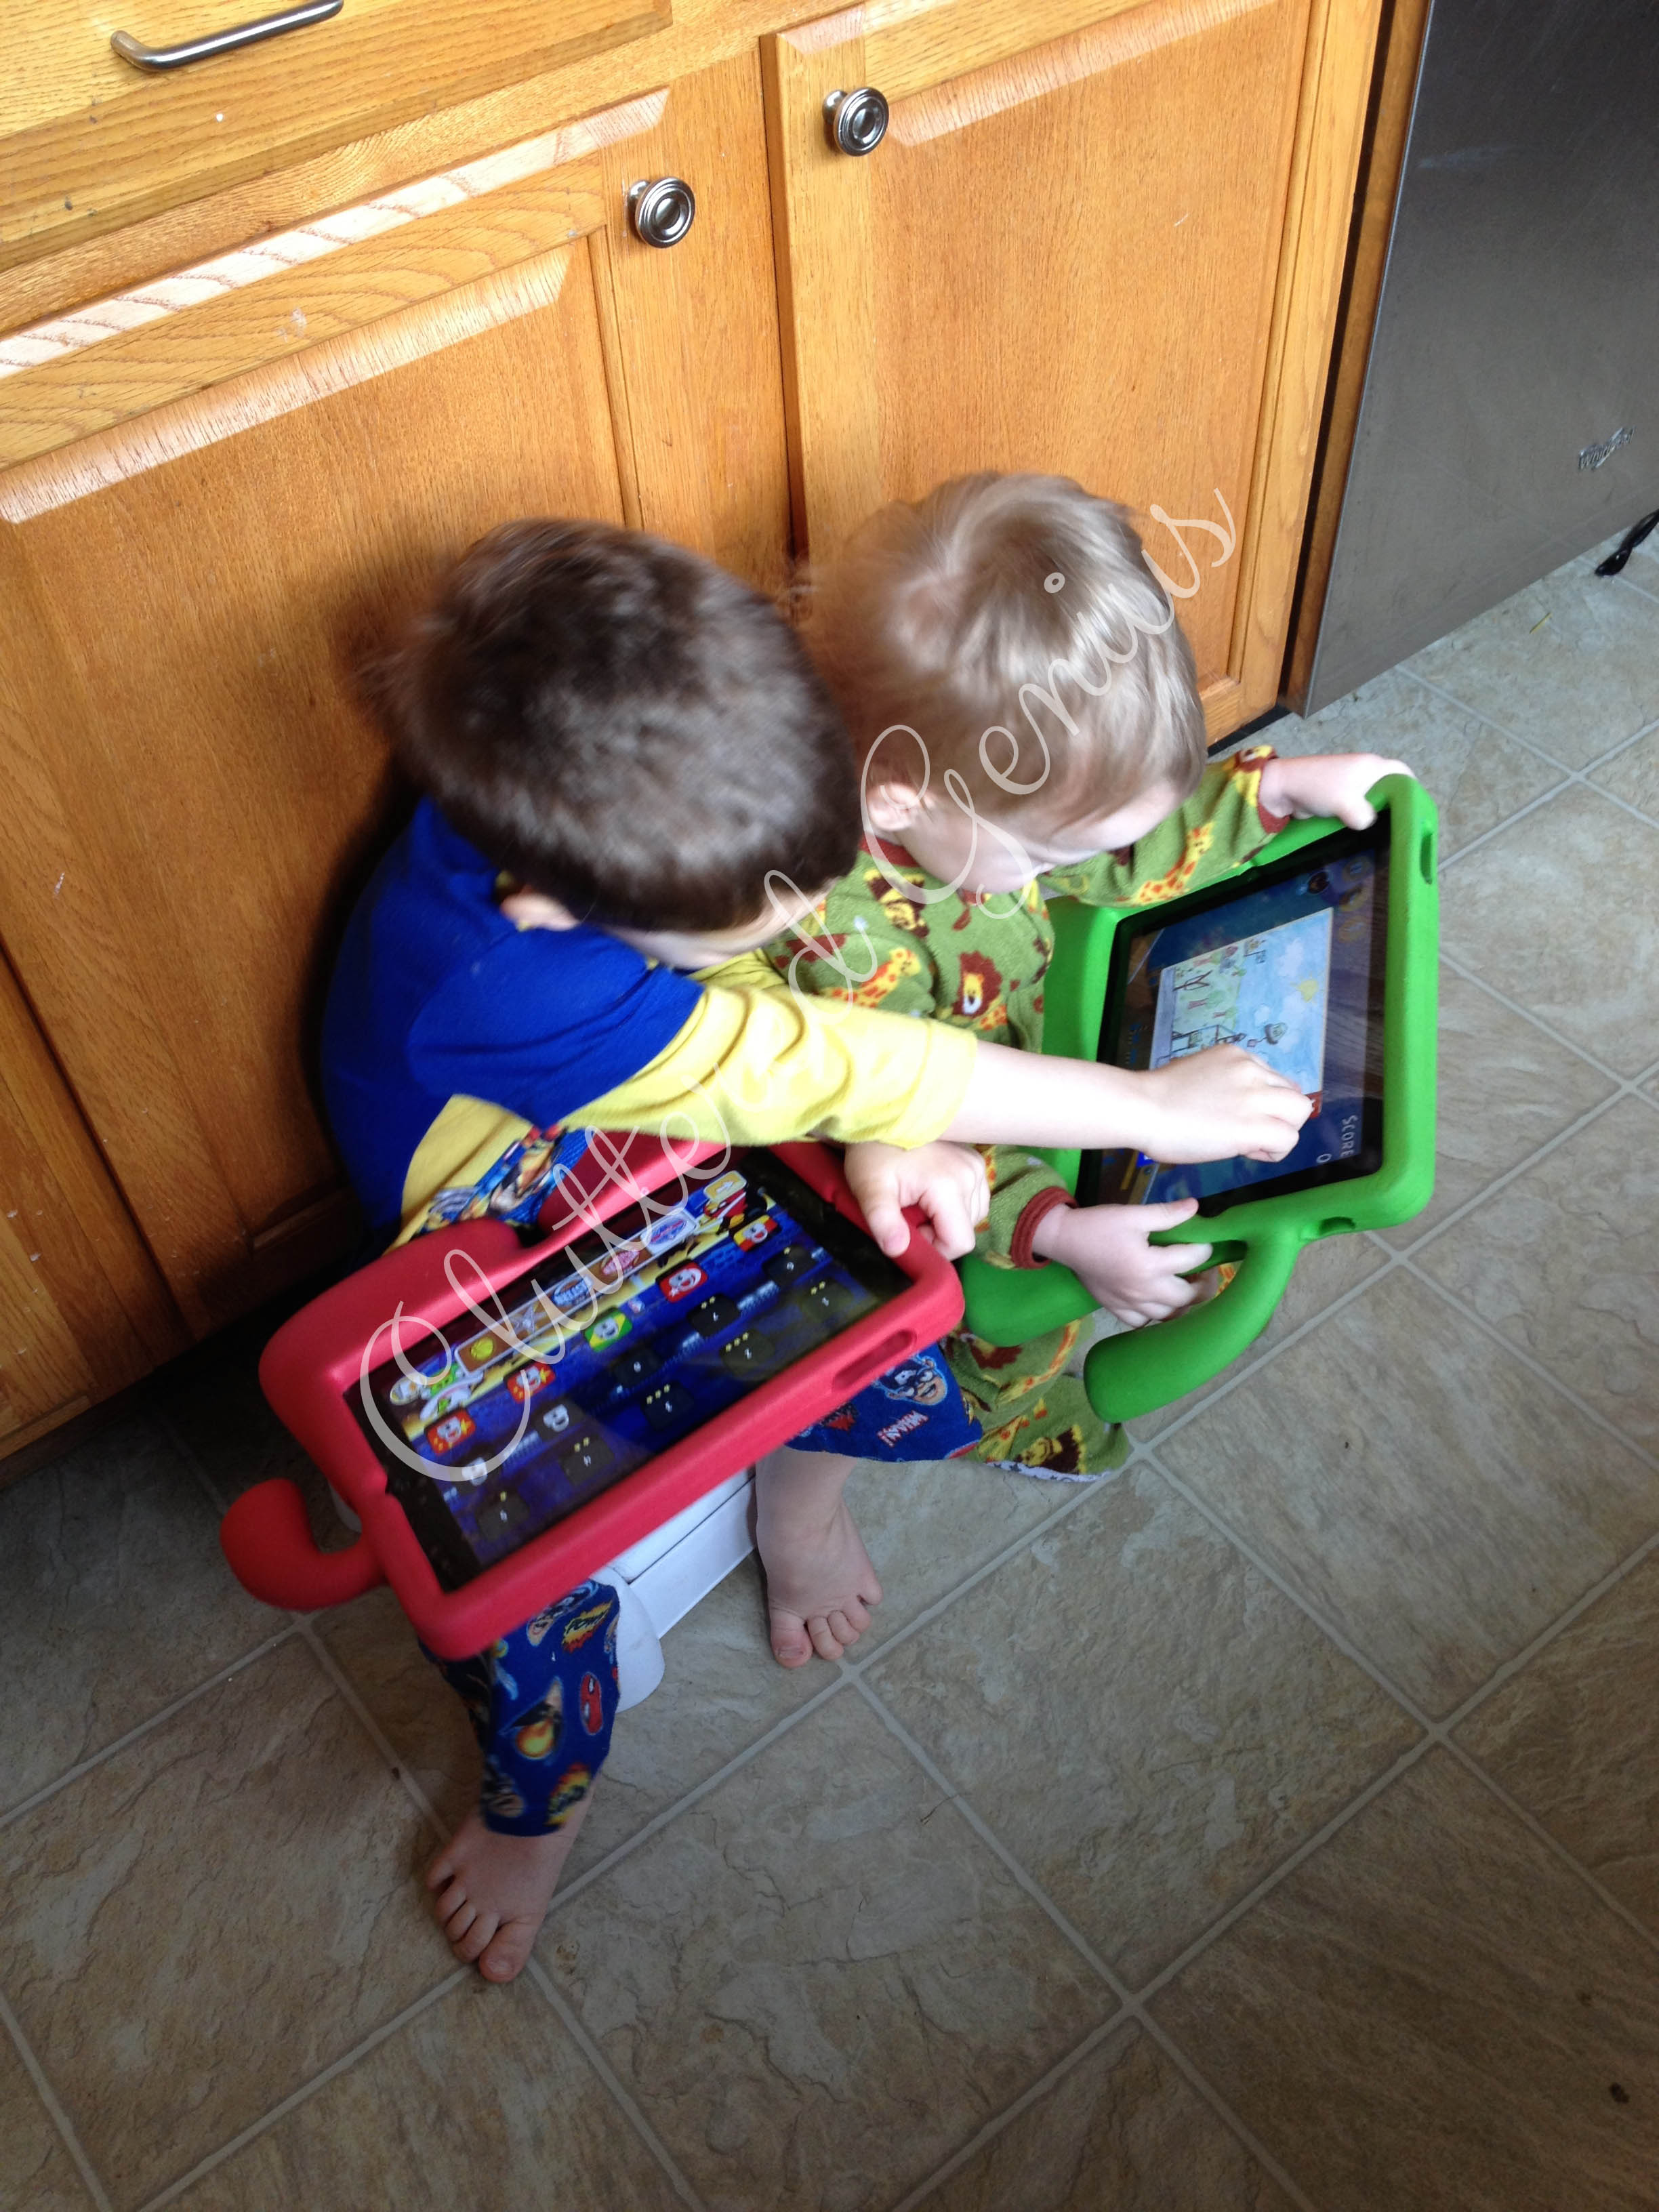 Blessings: the iPad (Day 8)